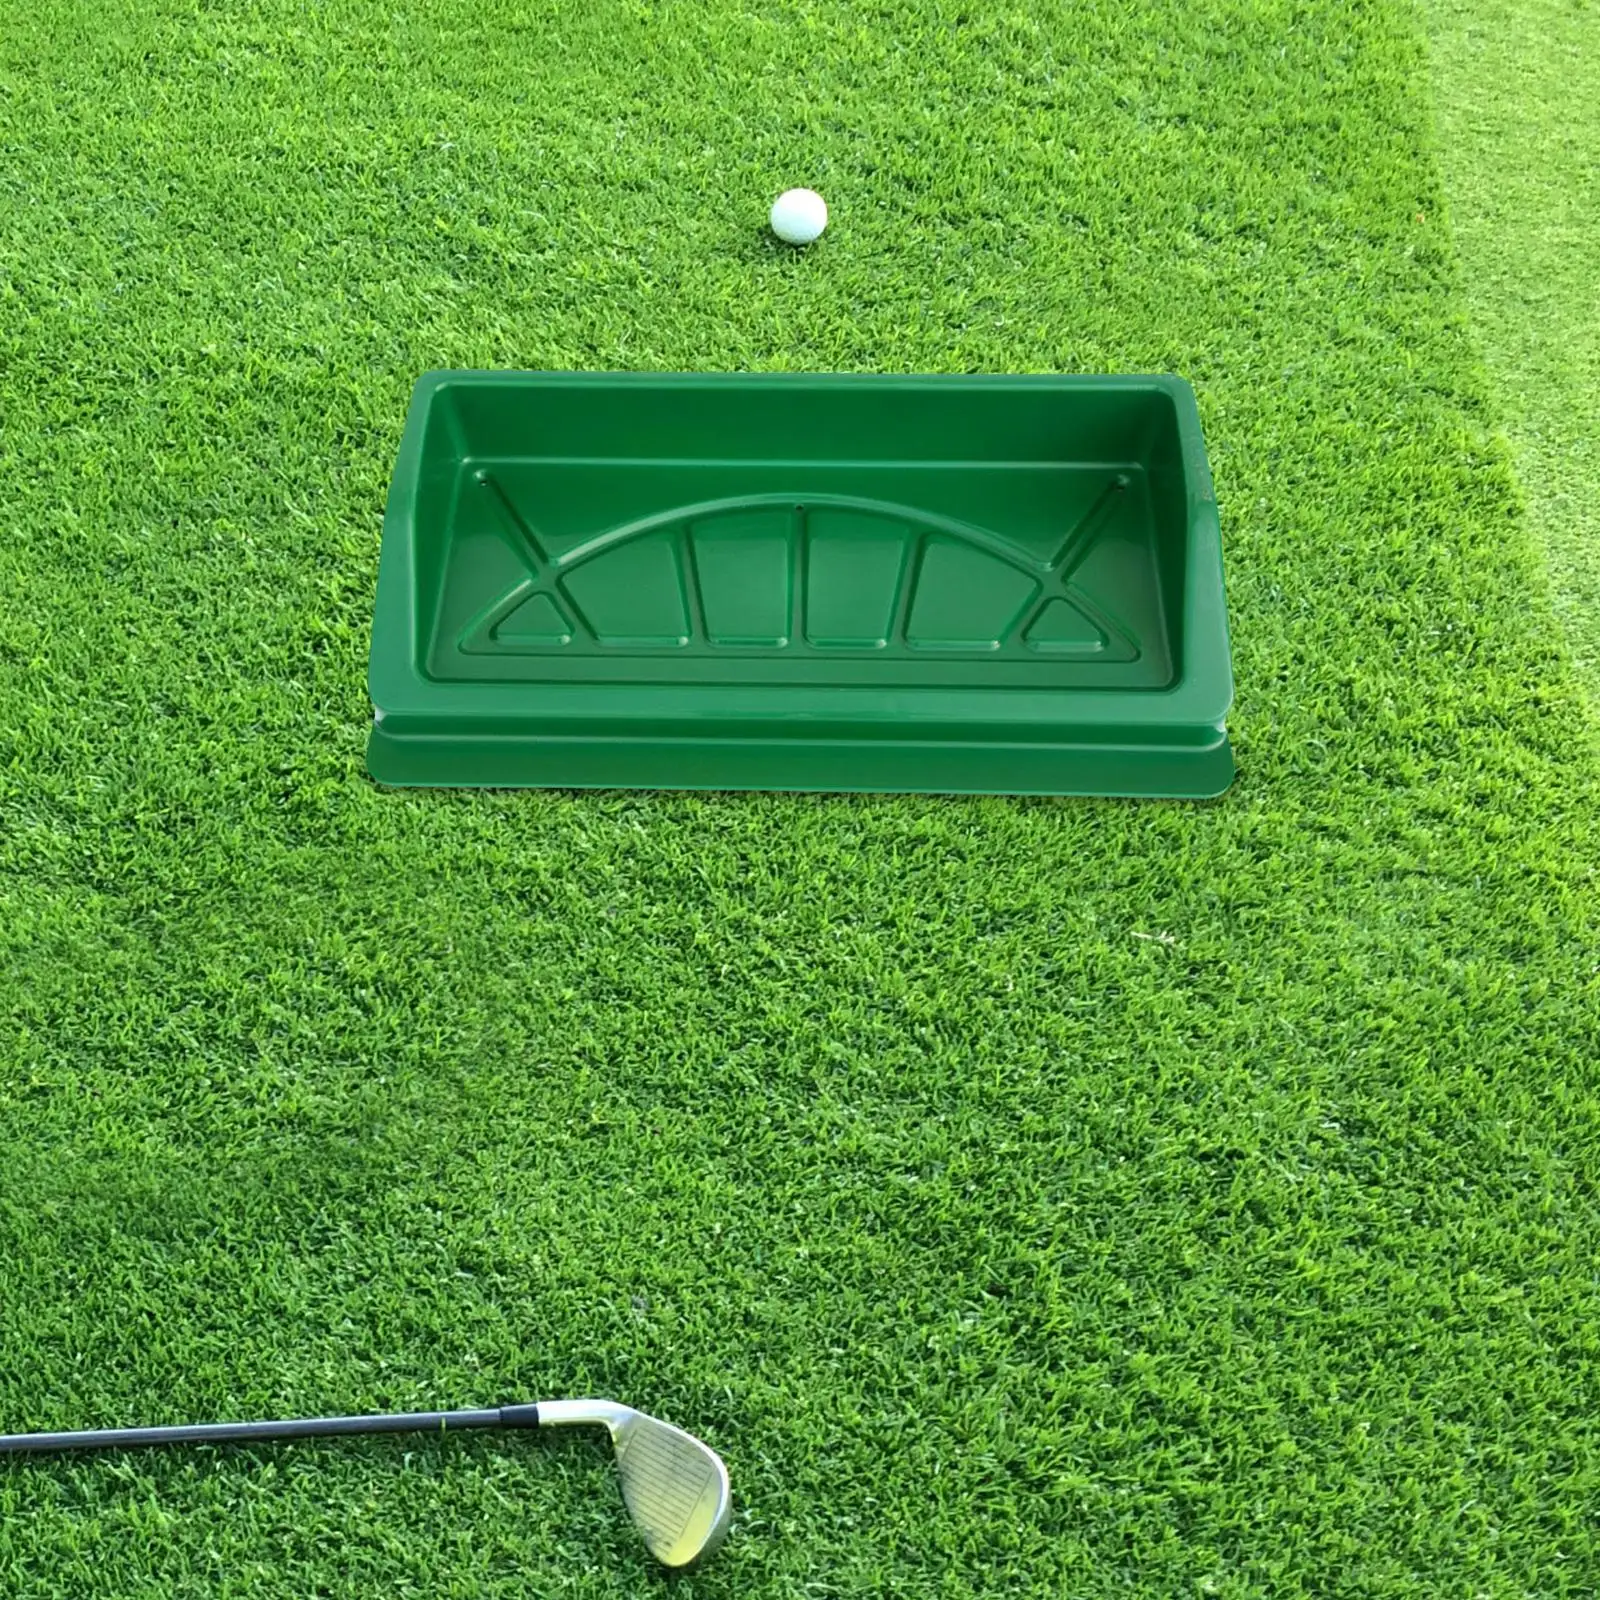 Golf Ball Tray Durable Golf Practice Accessory with Drainage Holes Golf Gear